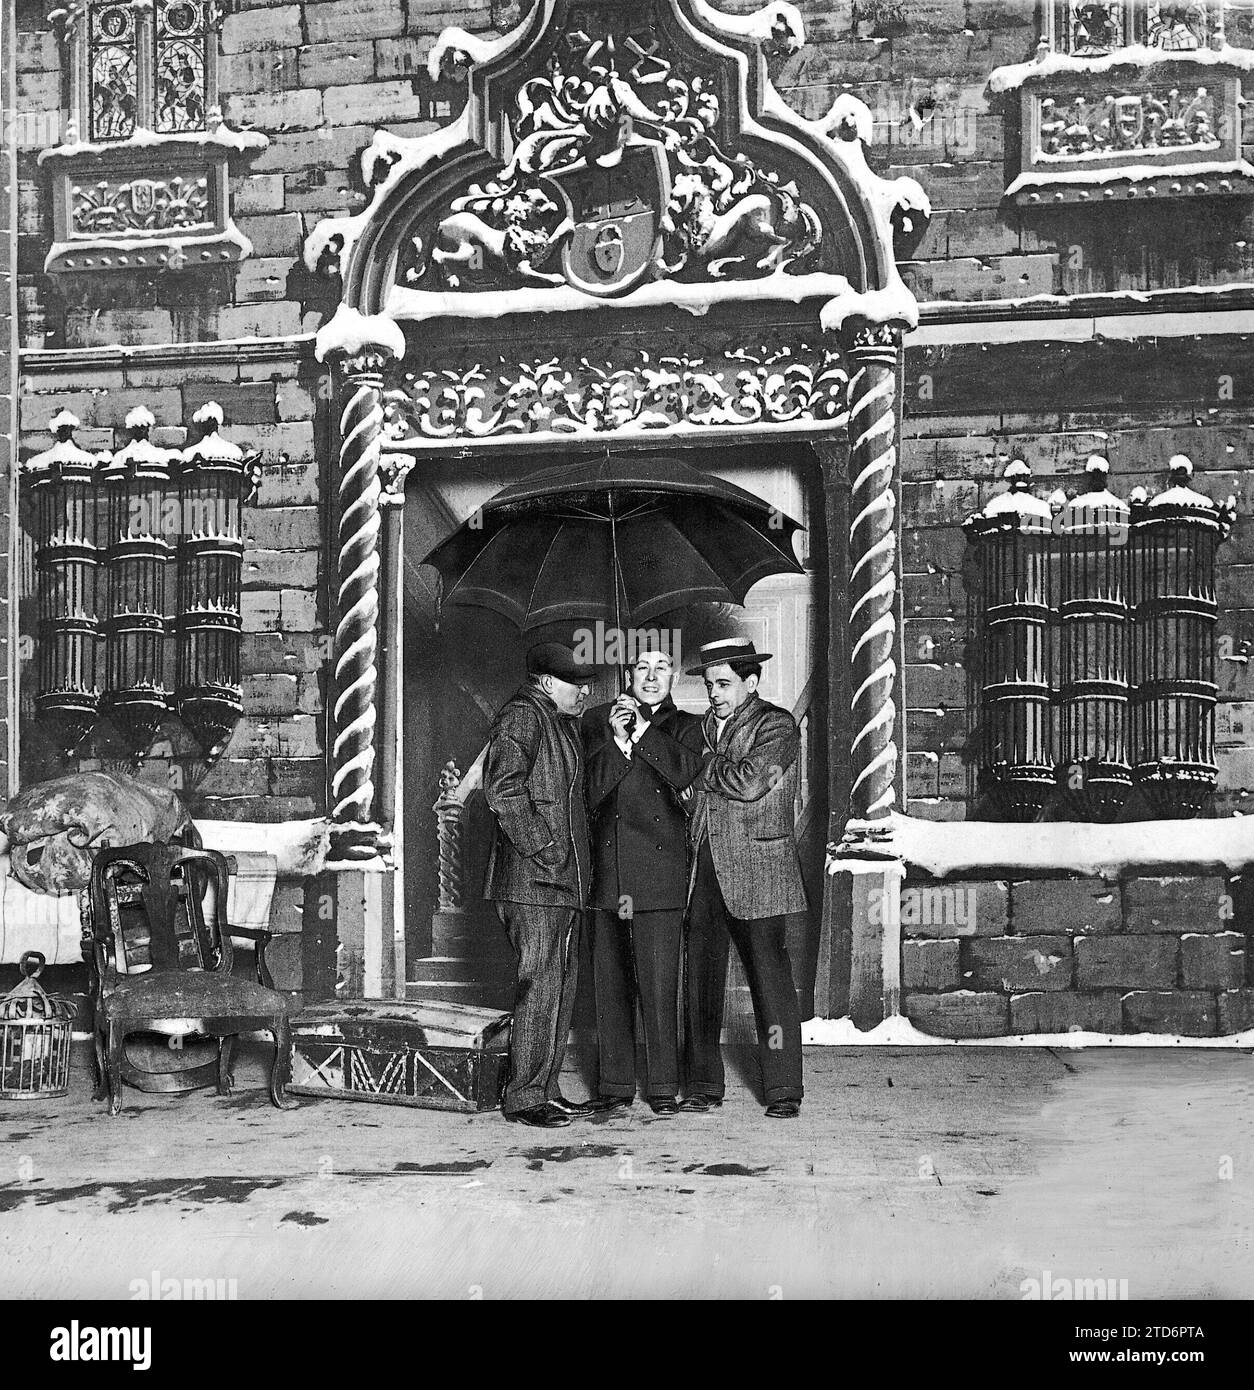 10/31/1911. Premiere at the Grand Theatre. A scene from 'Grandpa's Umbrella' by Messrs. Perrin and Palacios, music from Barrier and Luna. Credit: Album / Archivo ABC / Rivero Stock Photo